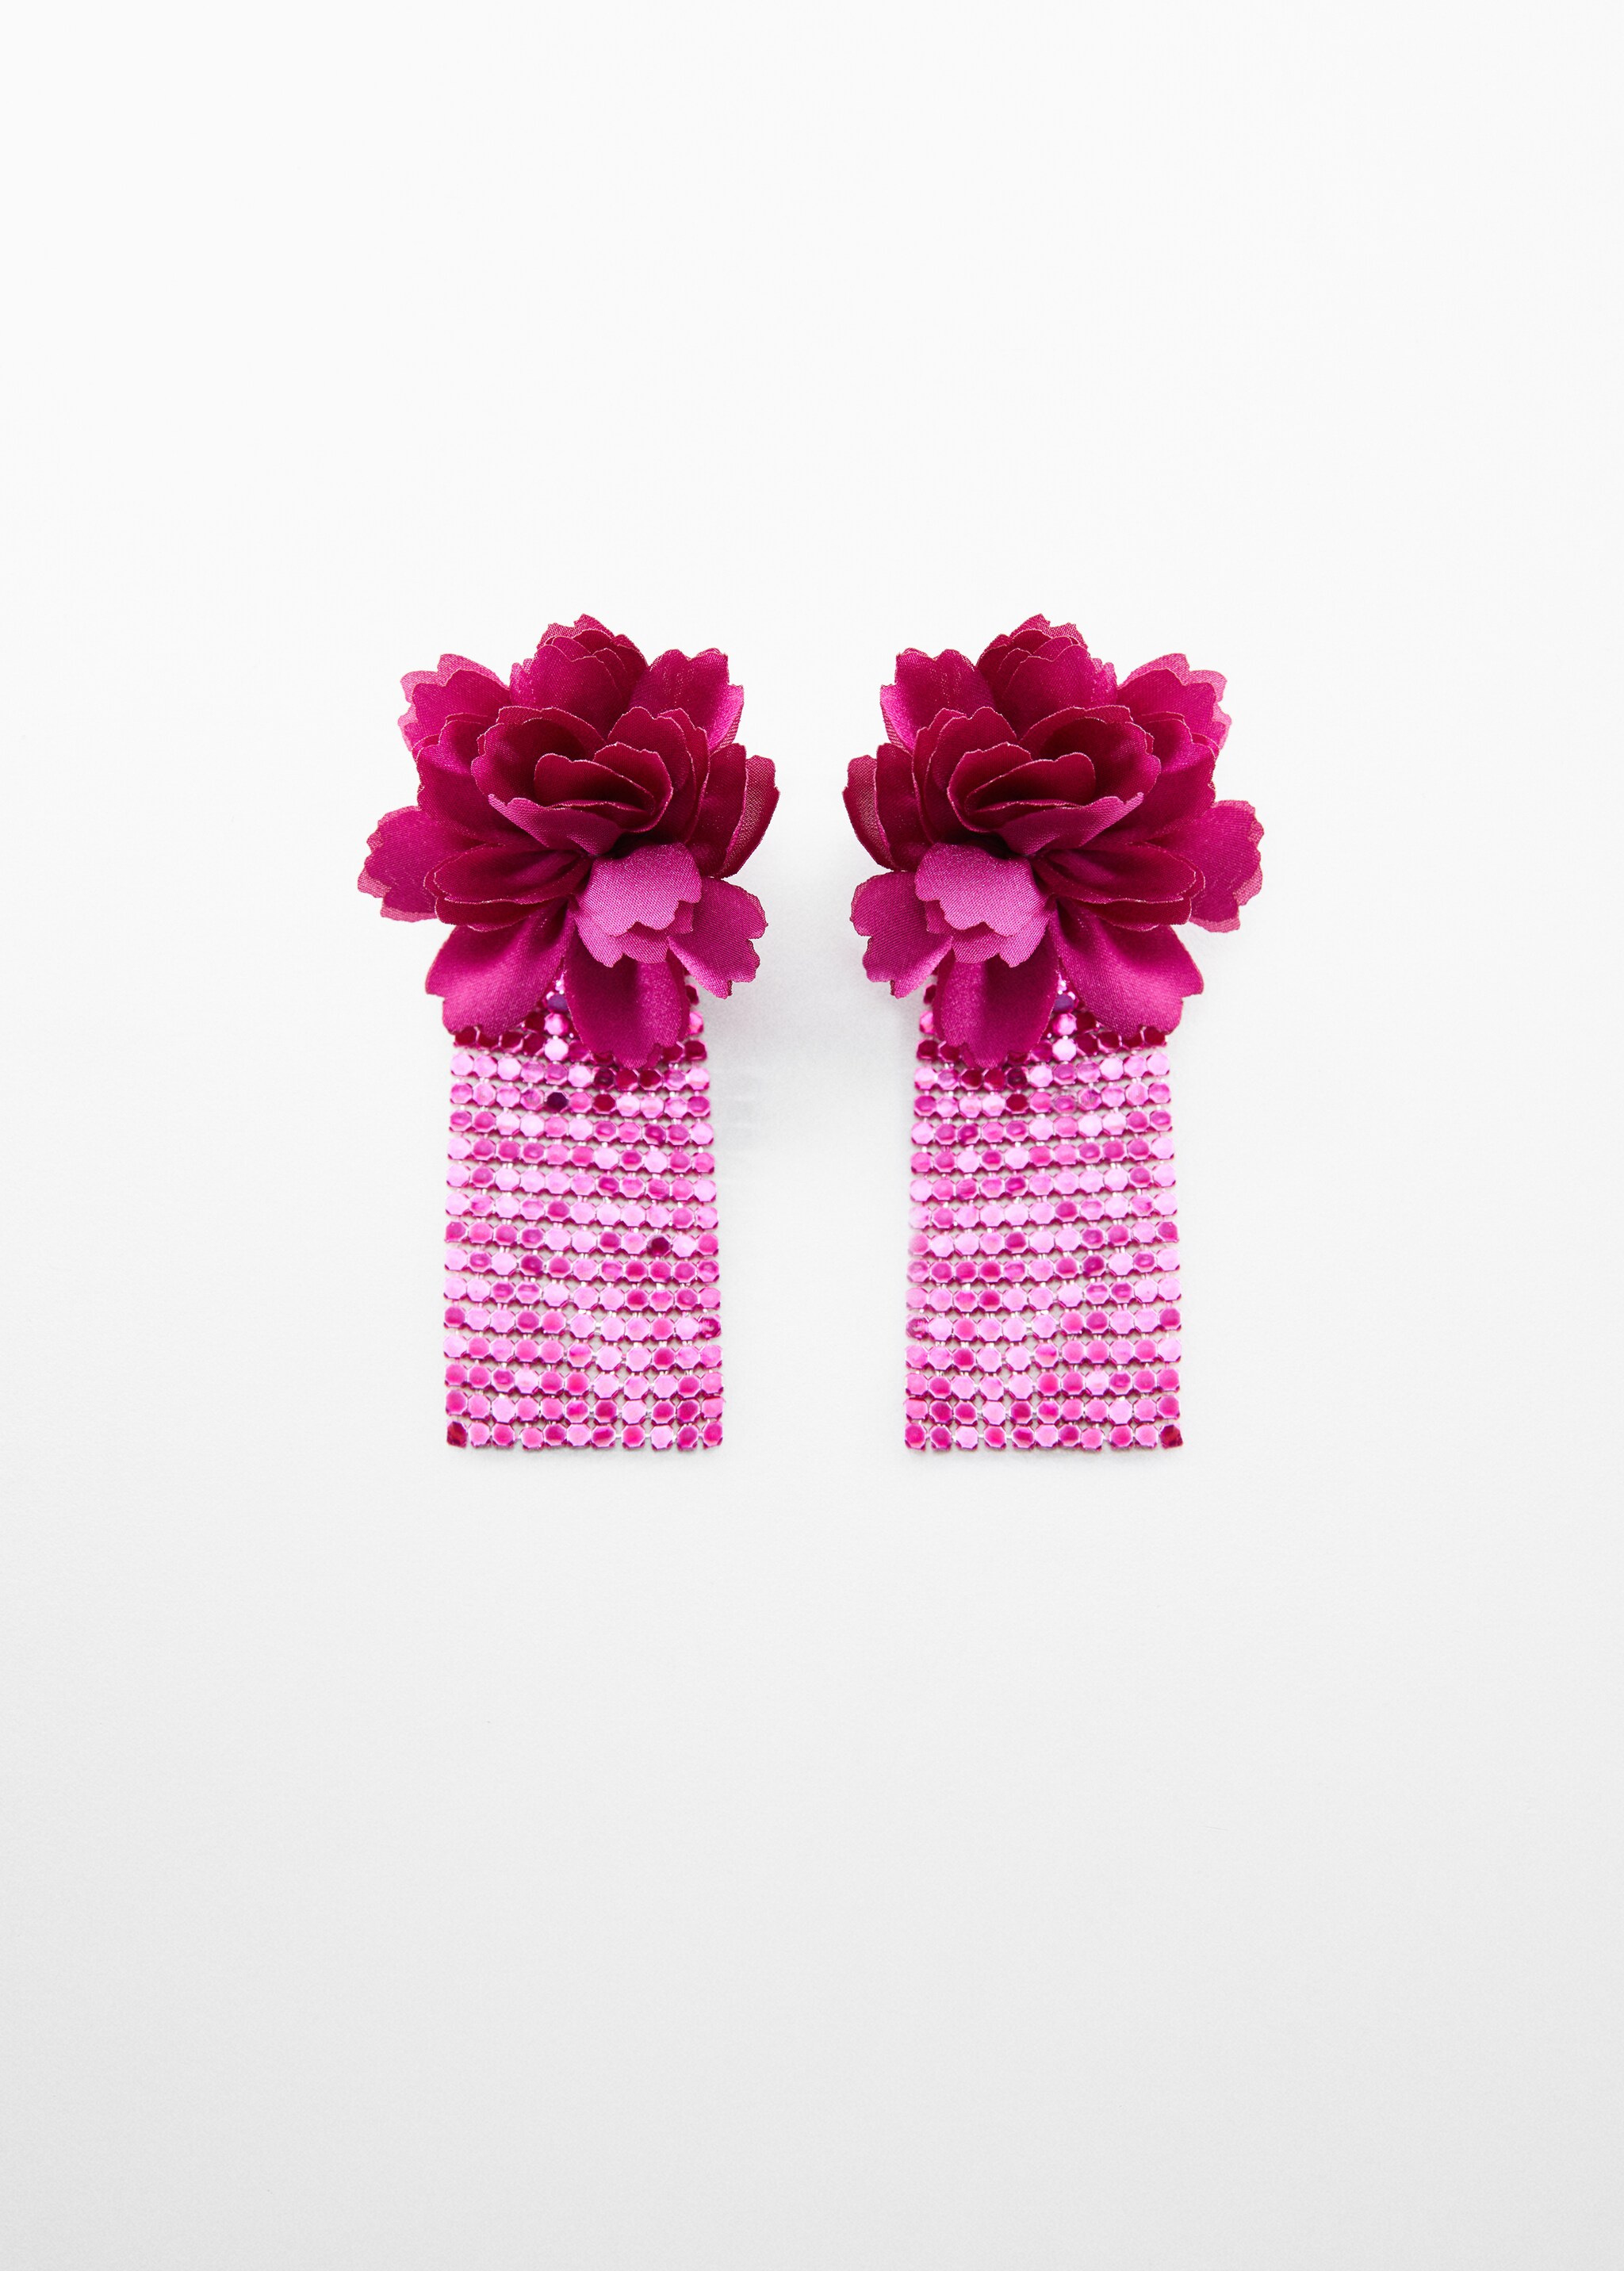 Mesh flower earrings - Article without model